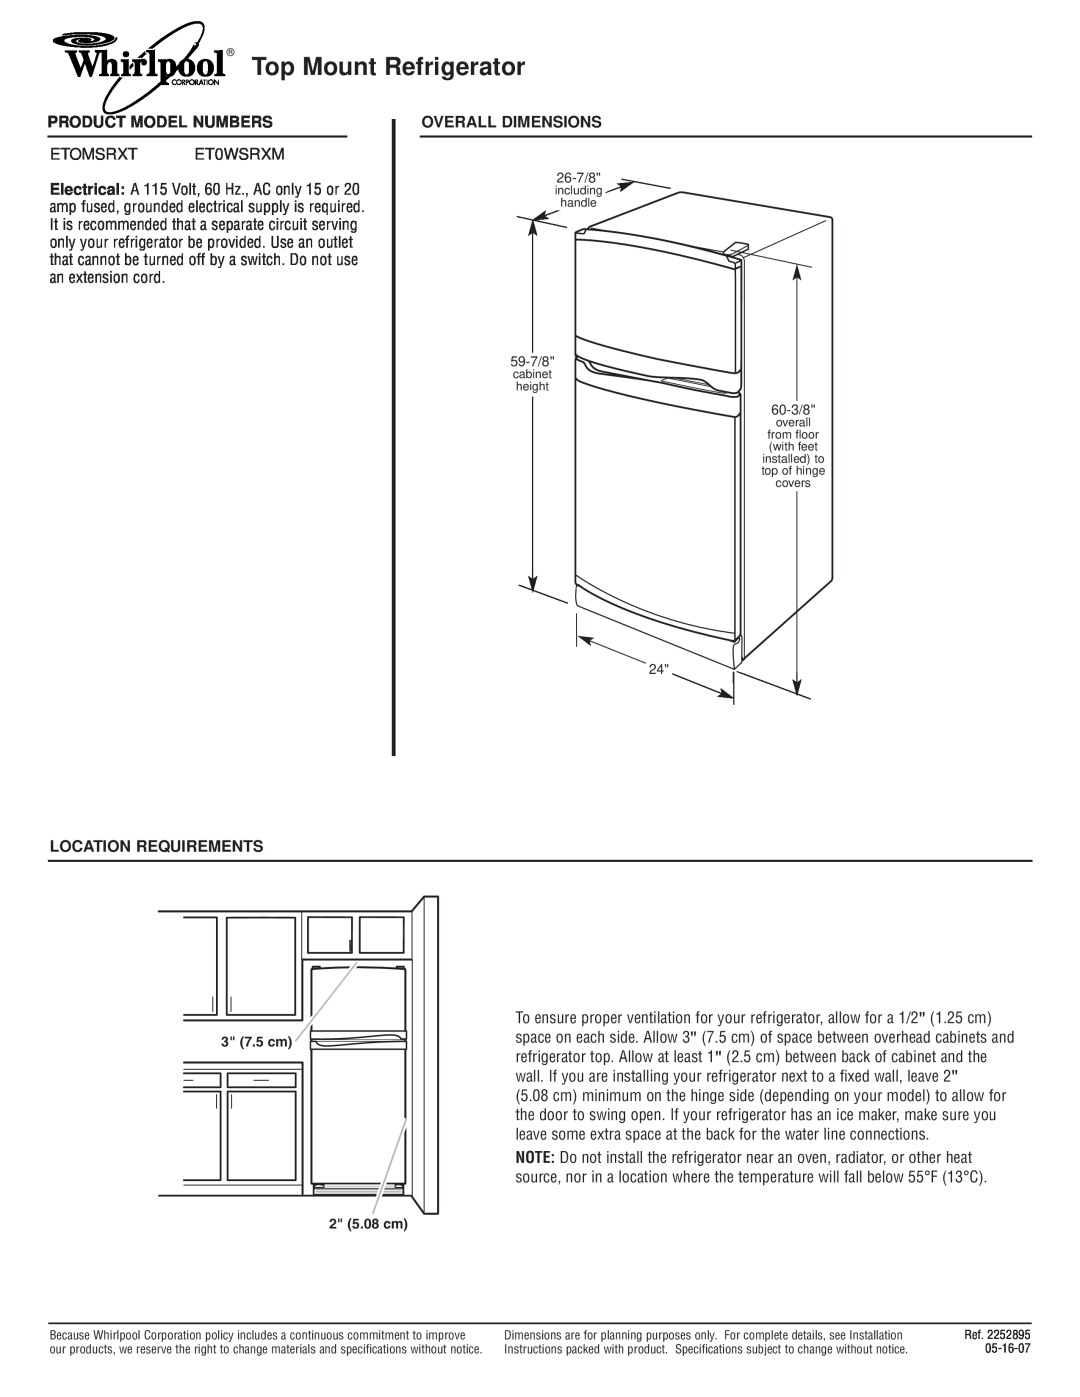 Whirlpool dimensions Top Mount Refrigerator, Product Model Numbers, ETOMSRXT ET0WSRXM, Overall Dimensions 